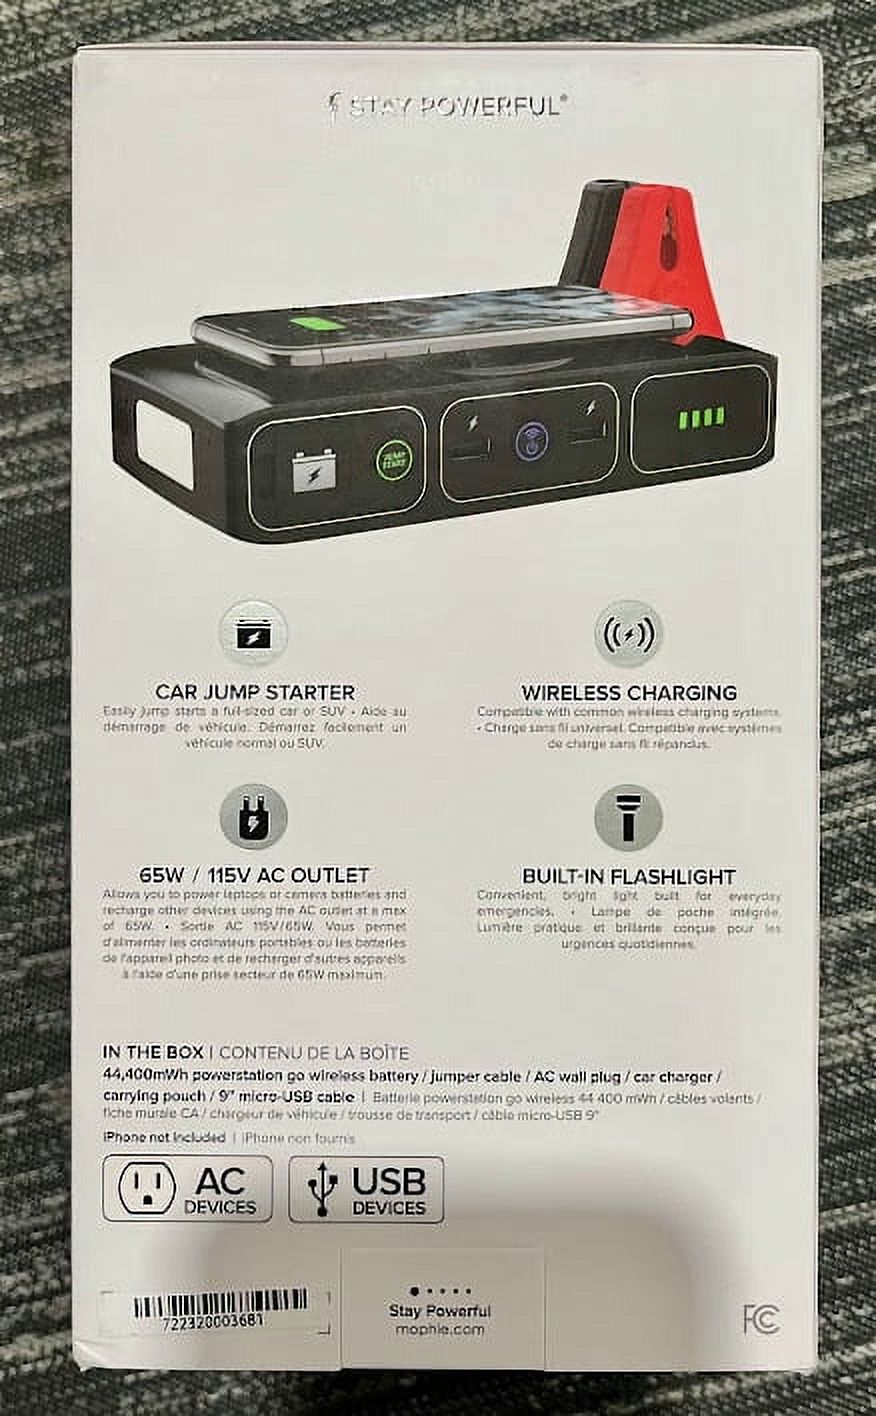 Mophie Powerstation Go Car Jump Starter with AC Outlet & Wireless Charging-Black - image 2 of 2